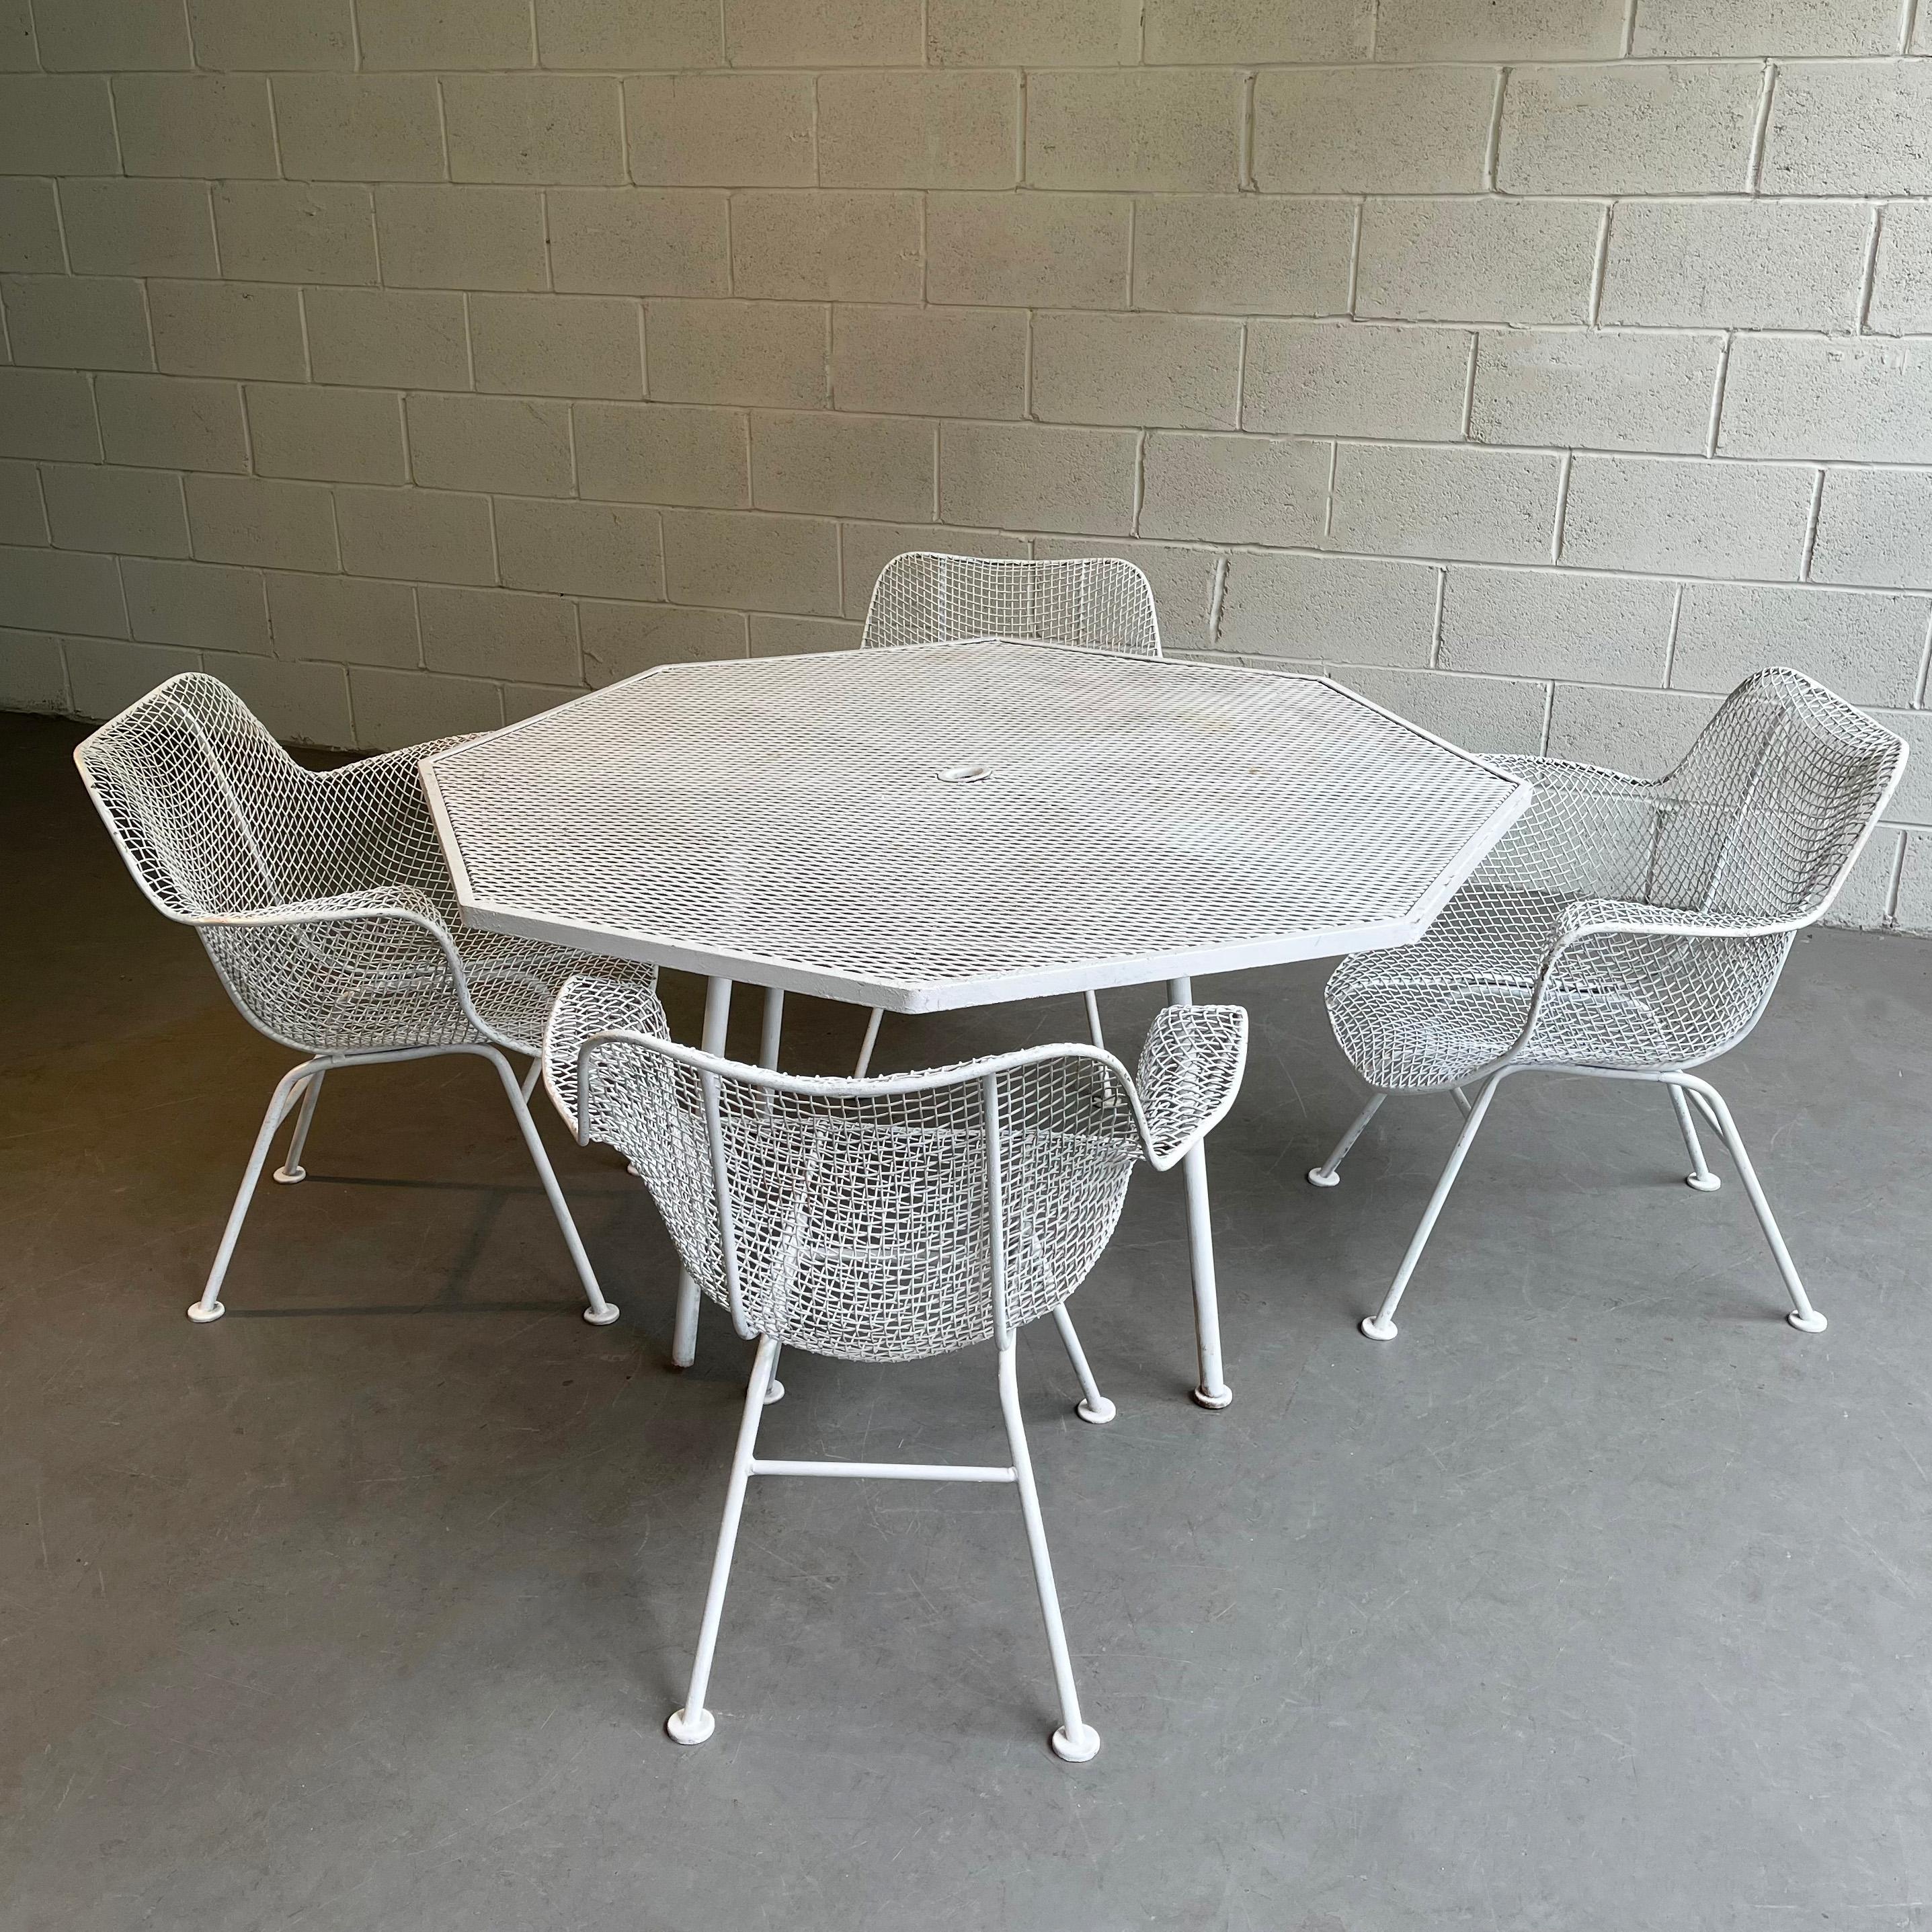 Mid-Century Modern, steel mesh and wrought iron, outdoor, patio dining set by Russell Woodard, Sculptura features 4 armchairs with a 52 inch diameter octagonal dining table. The chairs measure 26 W x 25 D x 27 Ht, seat Ht 13.